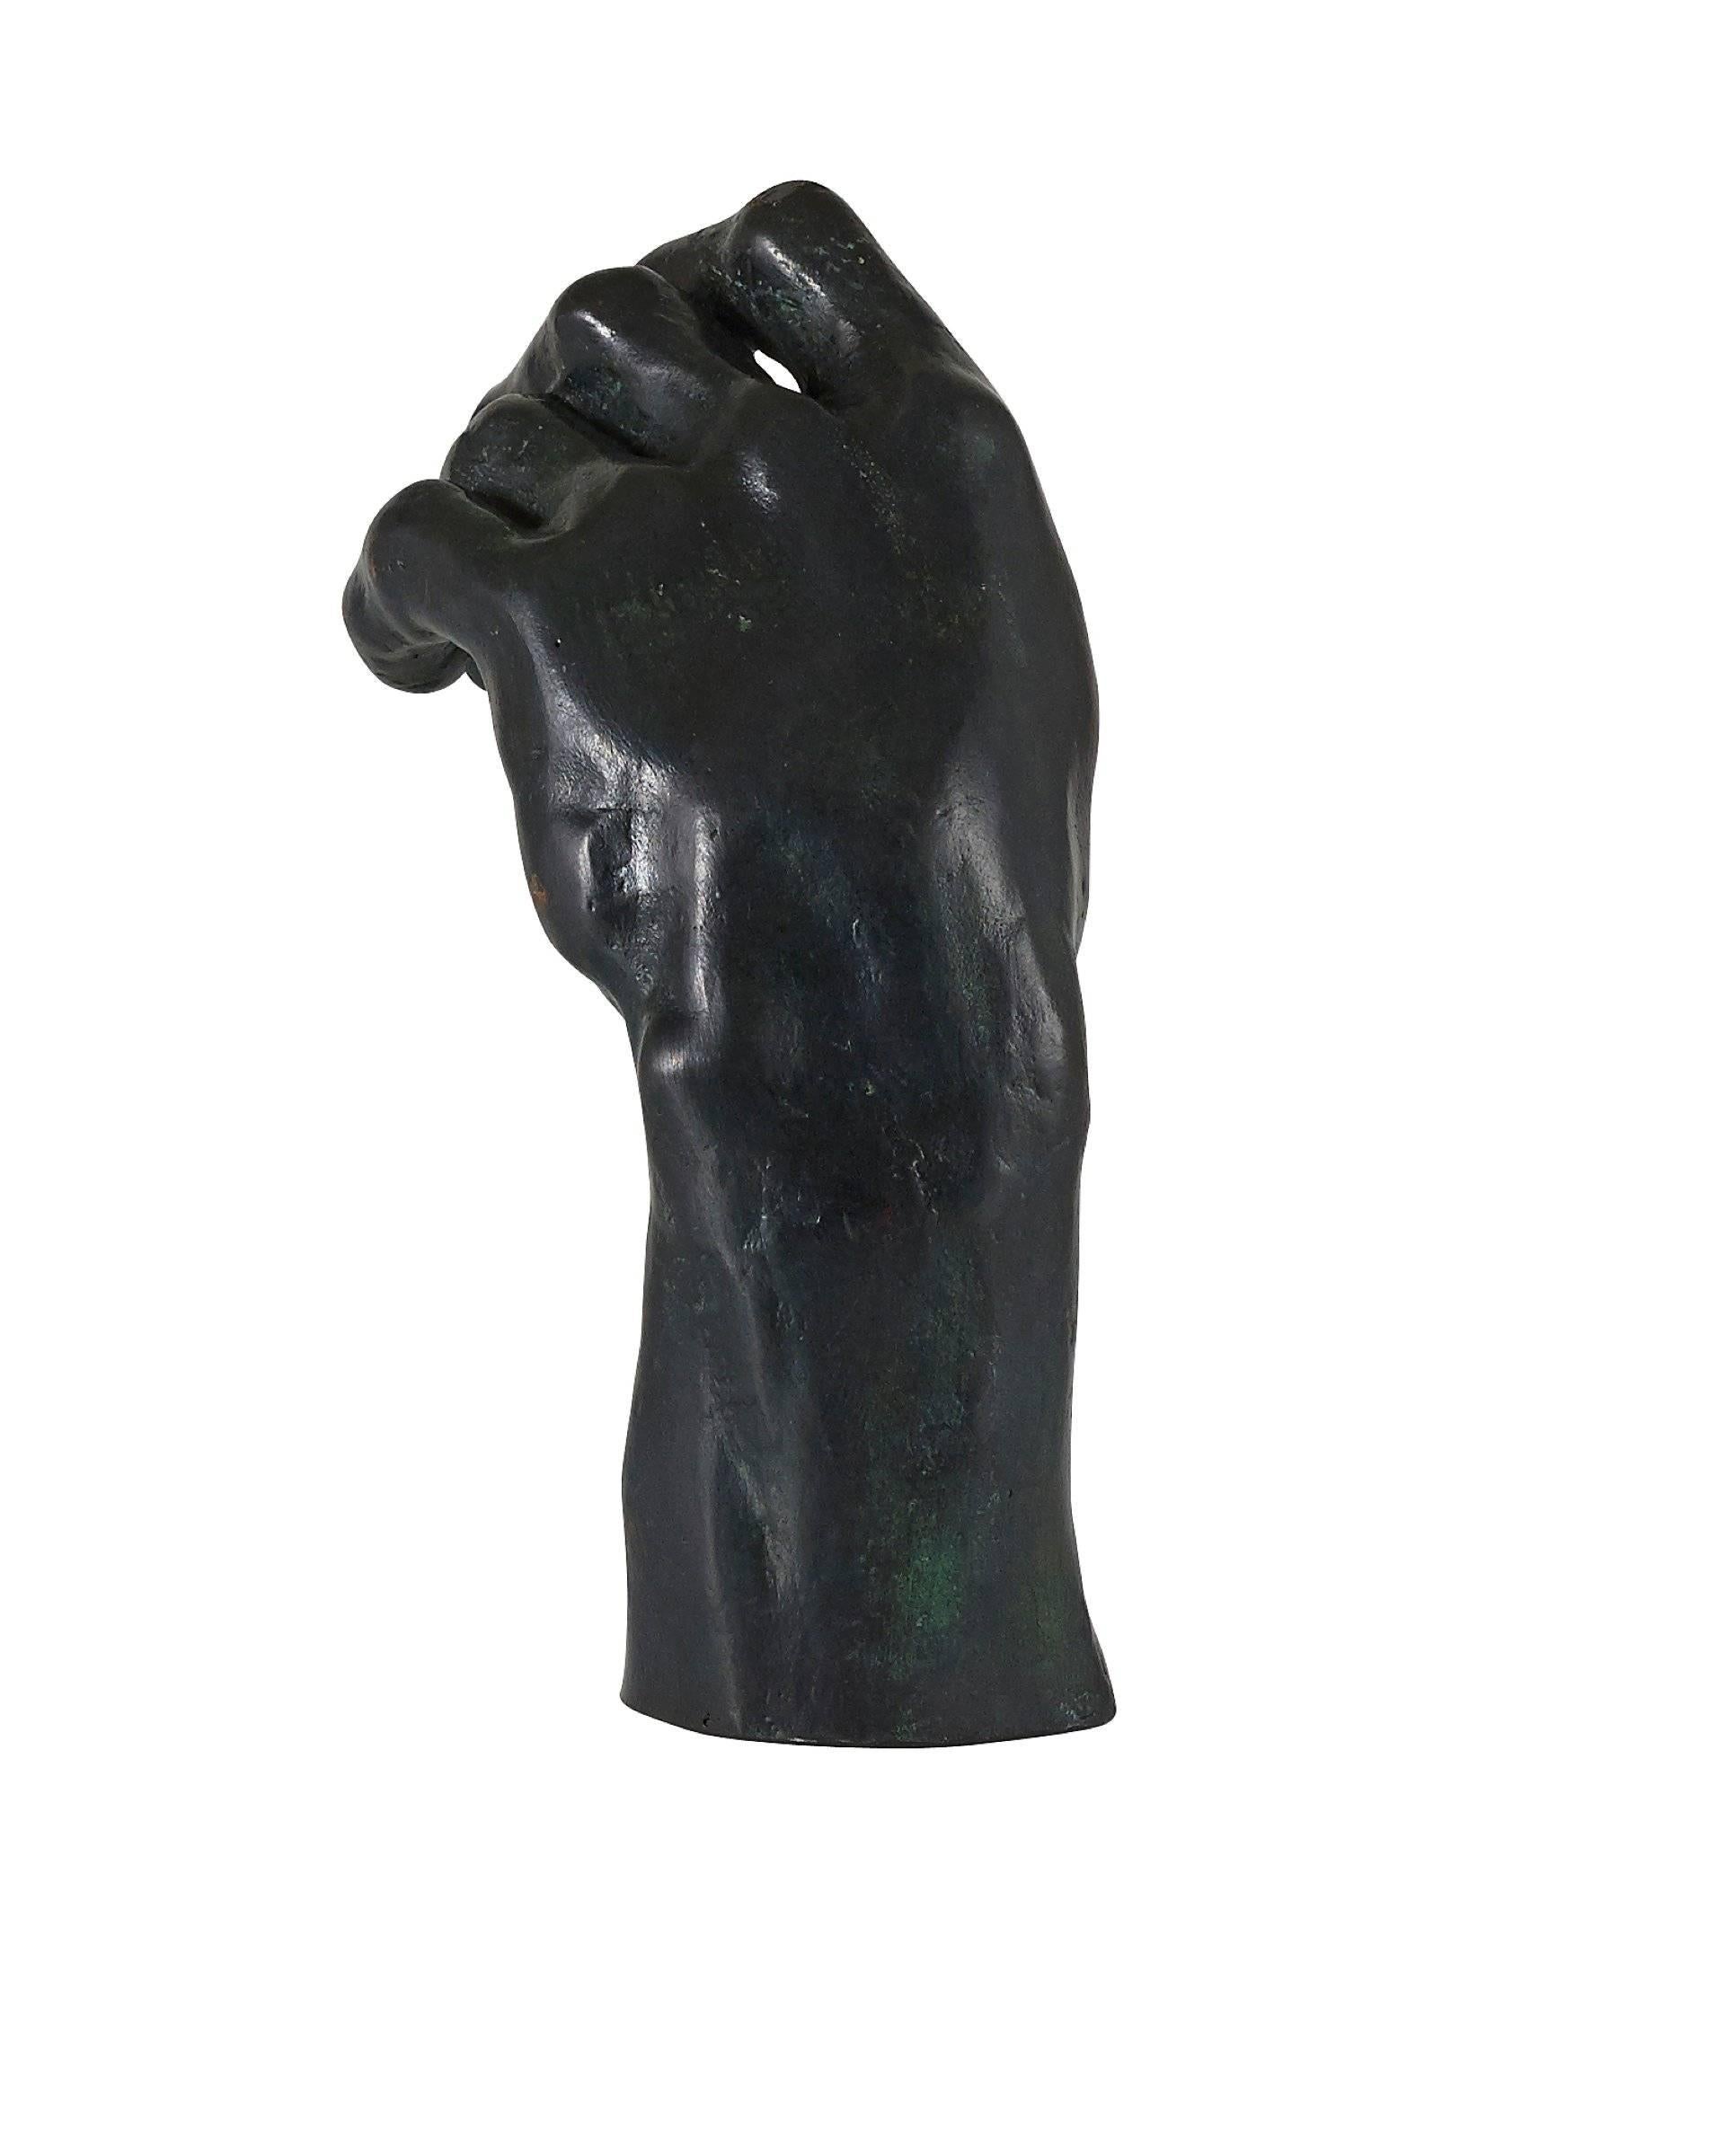 Cast by lost wax process
Black patina

Of all Rodin’s works, 